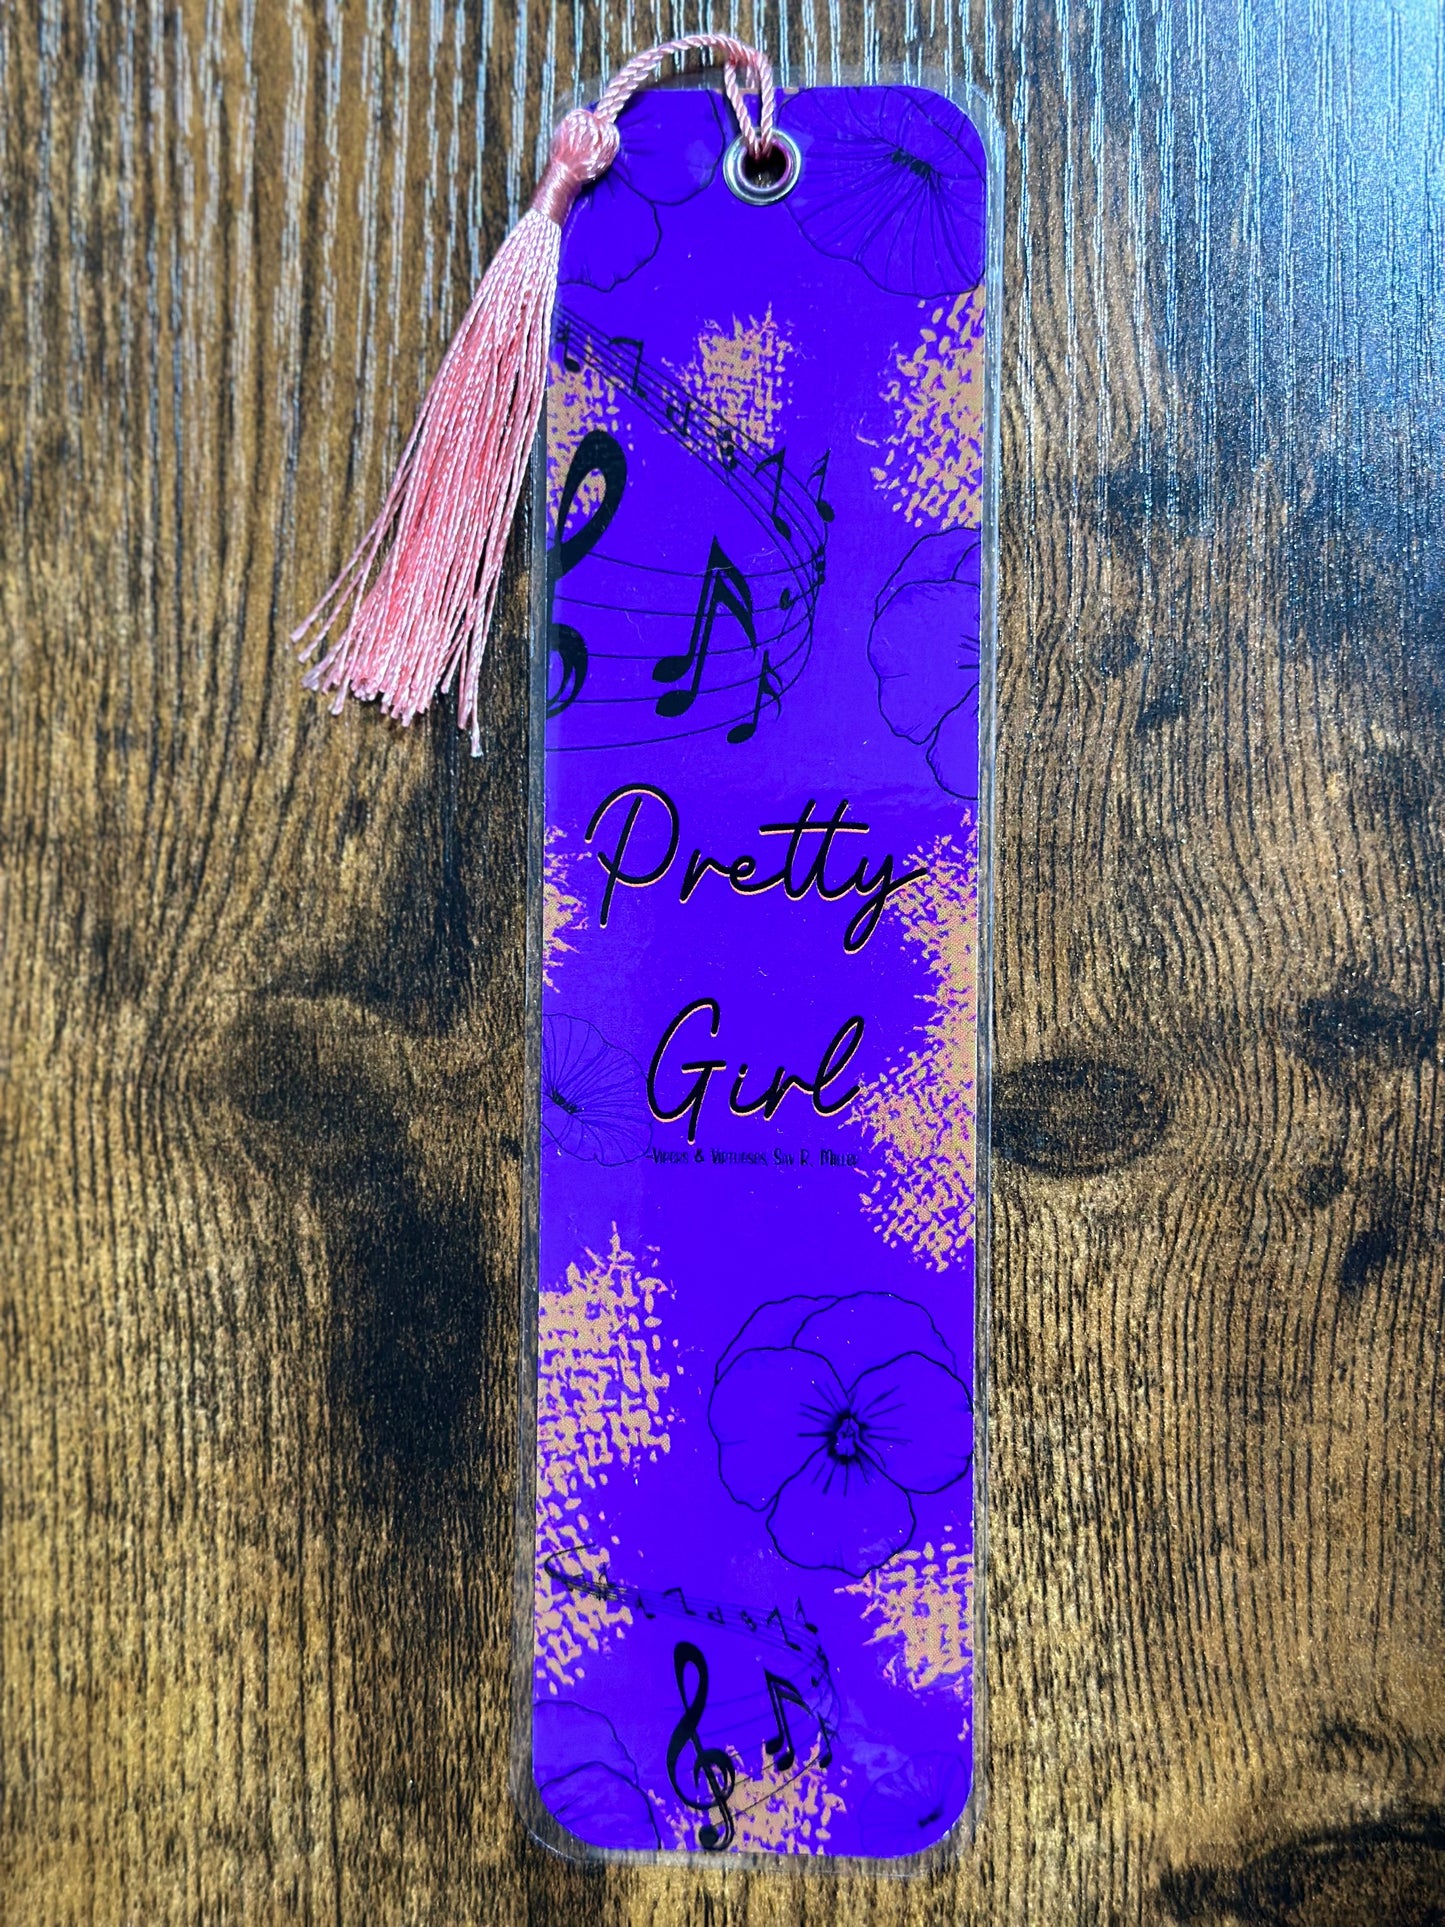 "Pretty Girl" Vipers and Virtuosos Bookmark